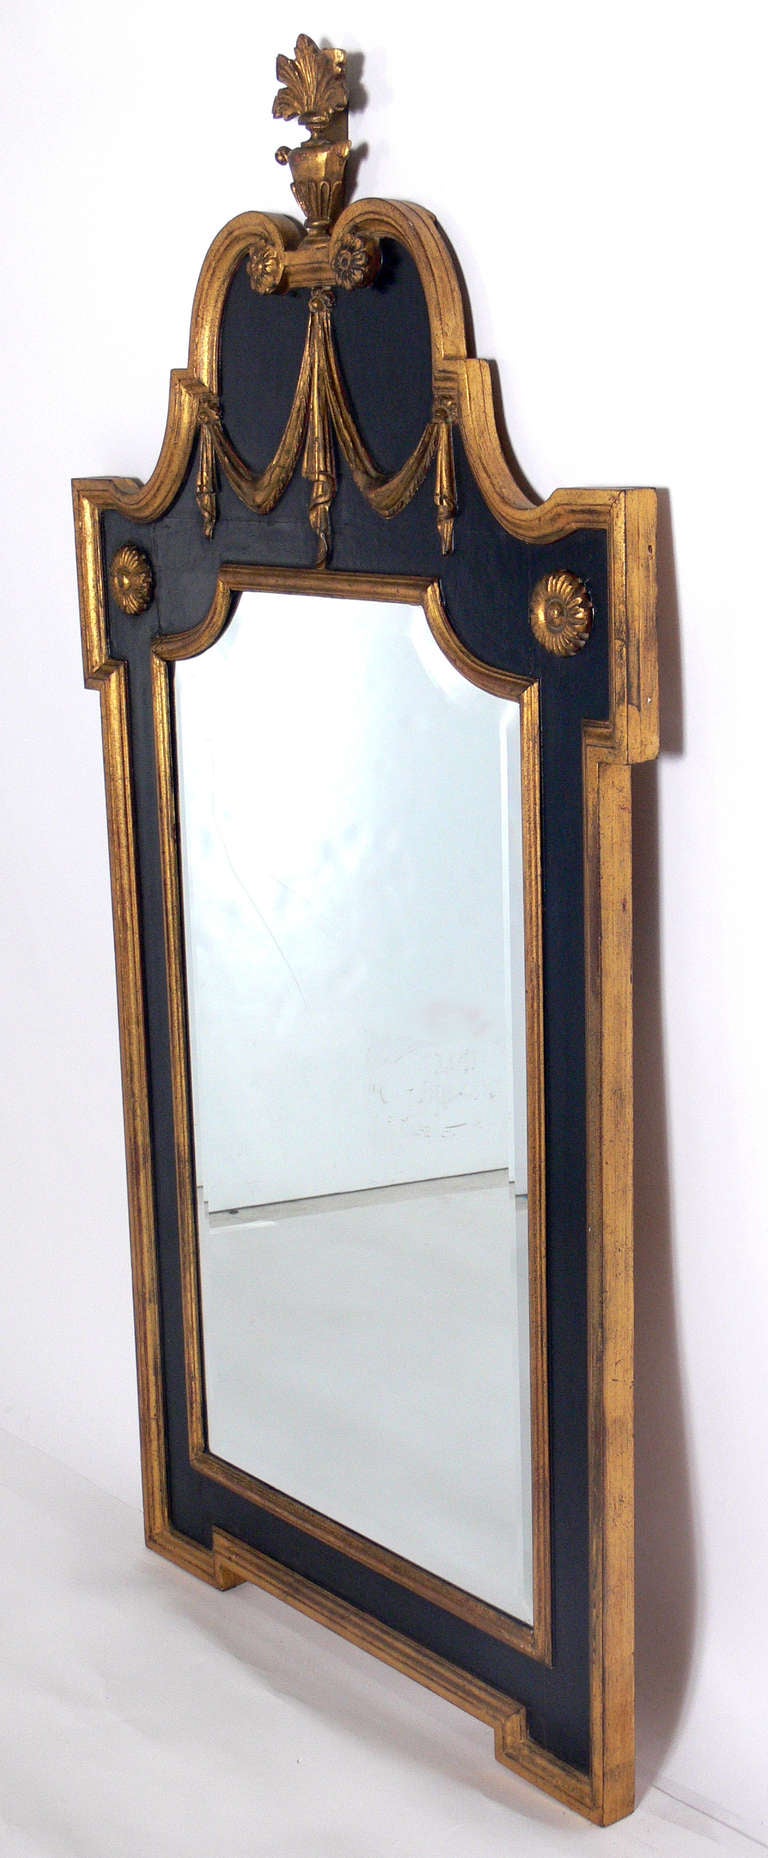 Neoclassical gold and black mirror, American, circa 1940's. Retains warm original patina to both frame and mirror.